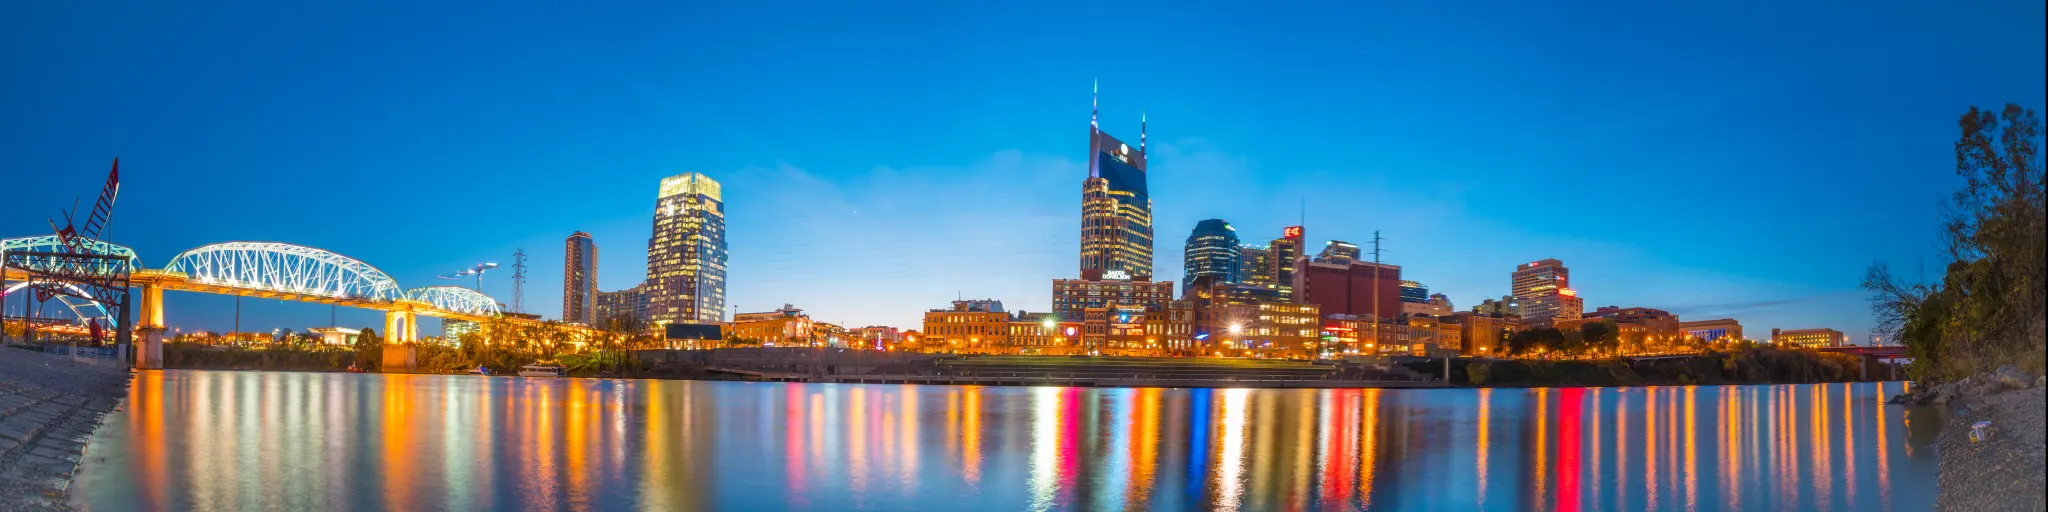 Downtown Nashville at night from across the Cumberland River, Tennessee